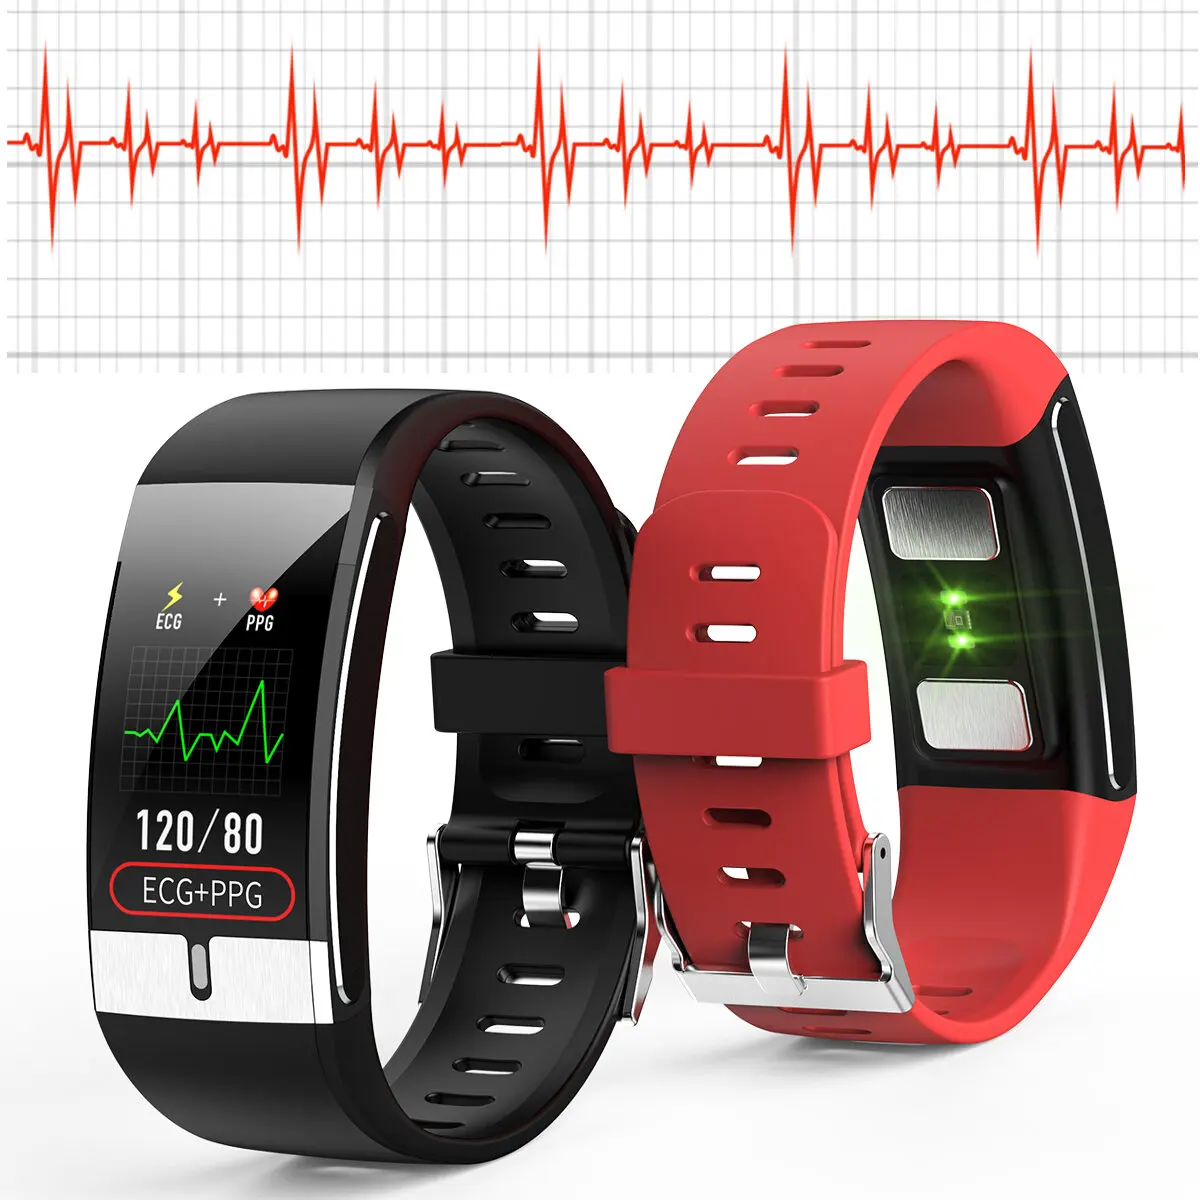 

E66 Thermometer ECG+PPG Heart Rate Blood Pressure Oxygen Monitor IP68 Waterproof USB Charging Smart Watch